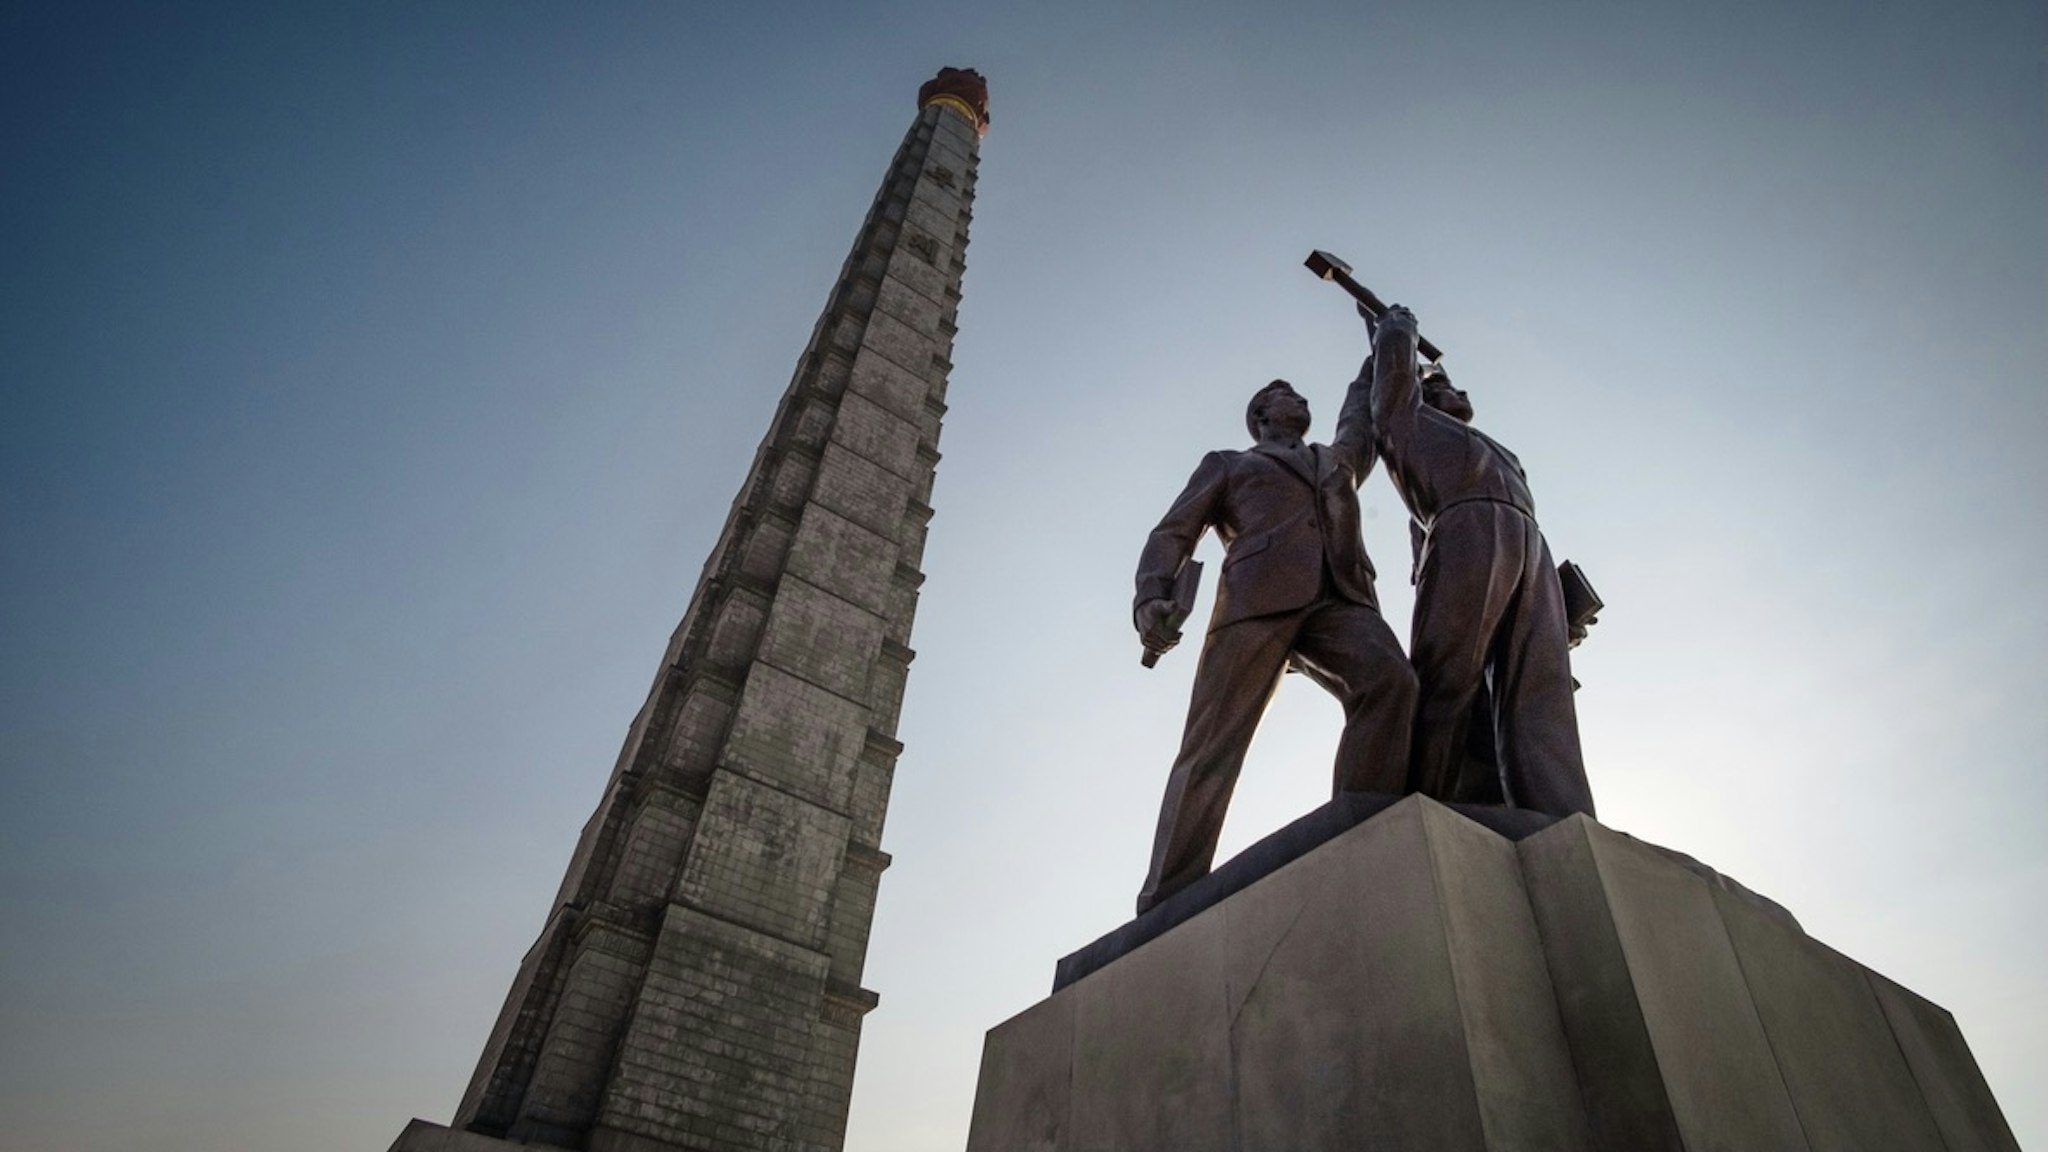 Juche Tower and Workers' Party monument in Pyongyang, North Korea - stock photo Juche Tower and Workers' Party monument in Pyongyang, North Korea on 01.01.2019 Pablo Bonfiglio via Getty Images